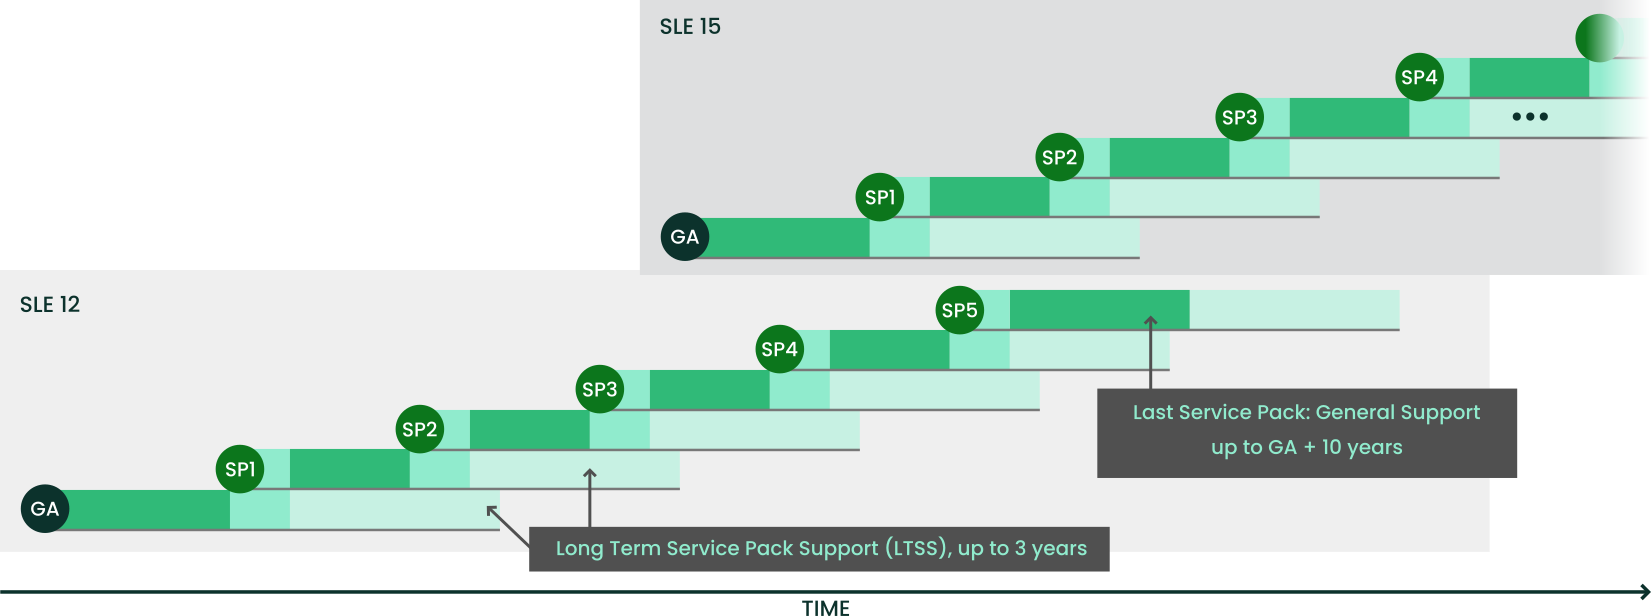 Long term service pack support